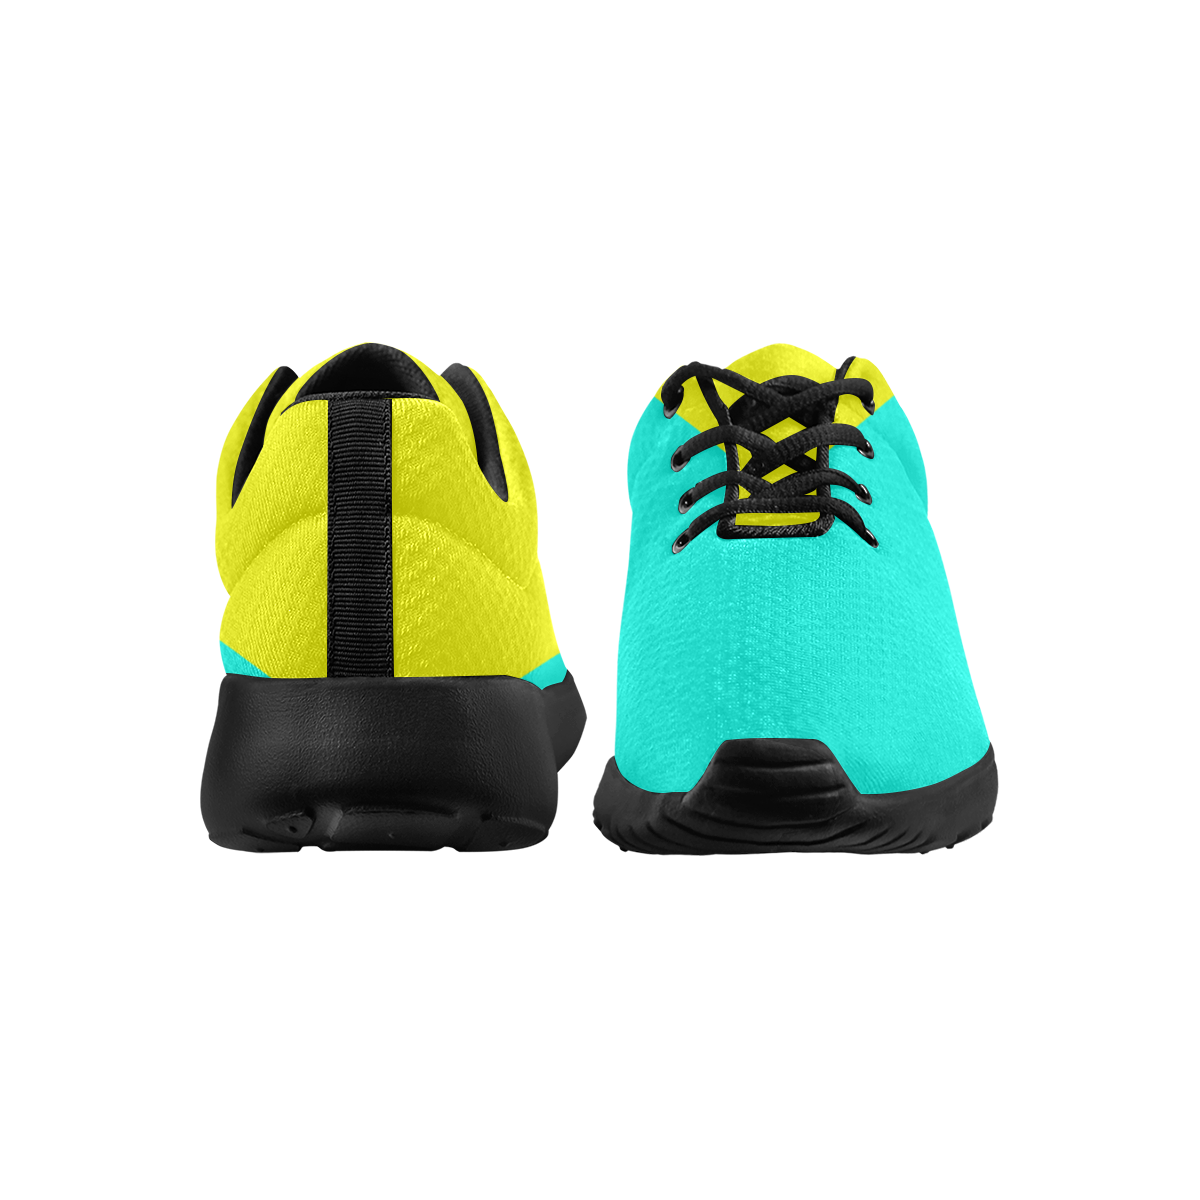 Bright Neon Yellow / Blue Women's Athletic Shoes (Model 0200)